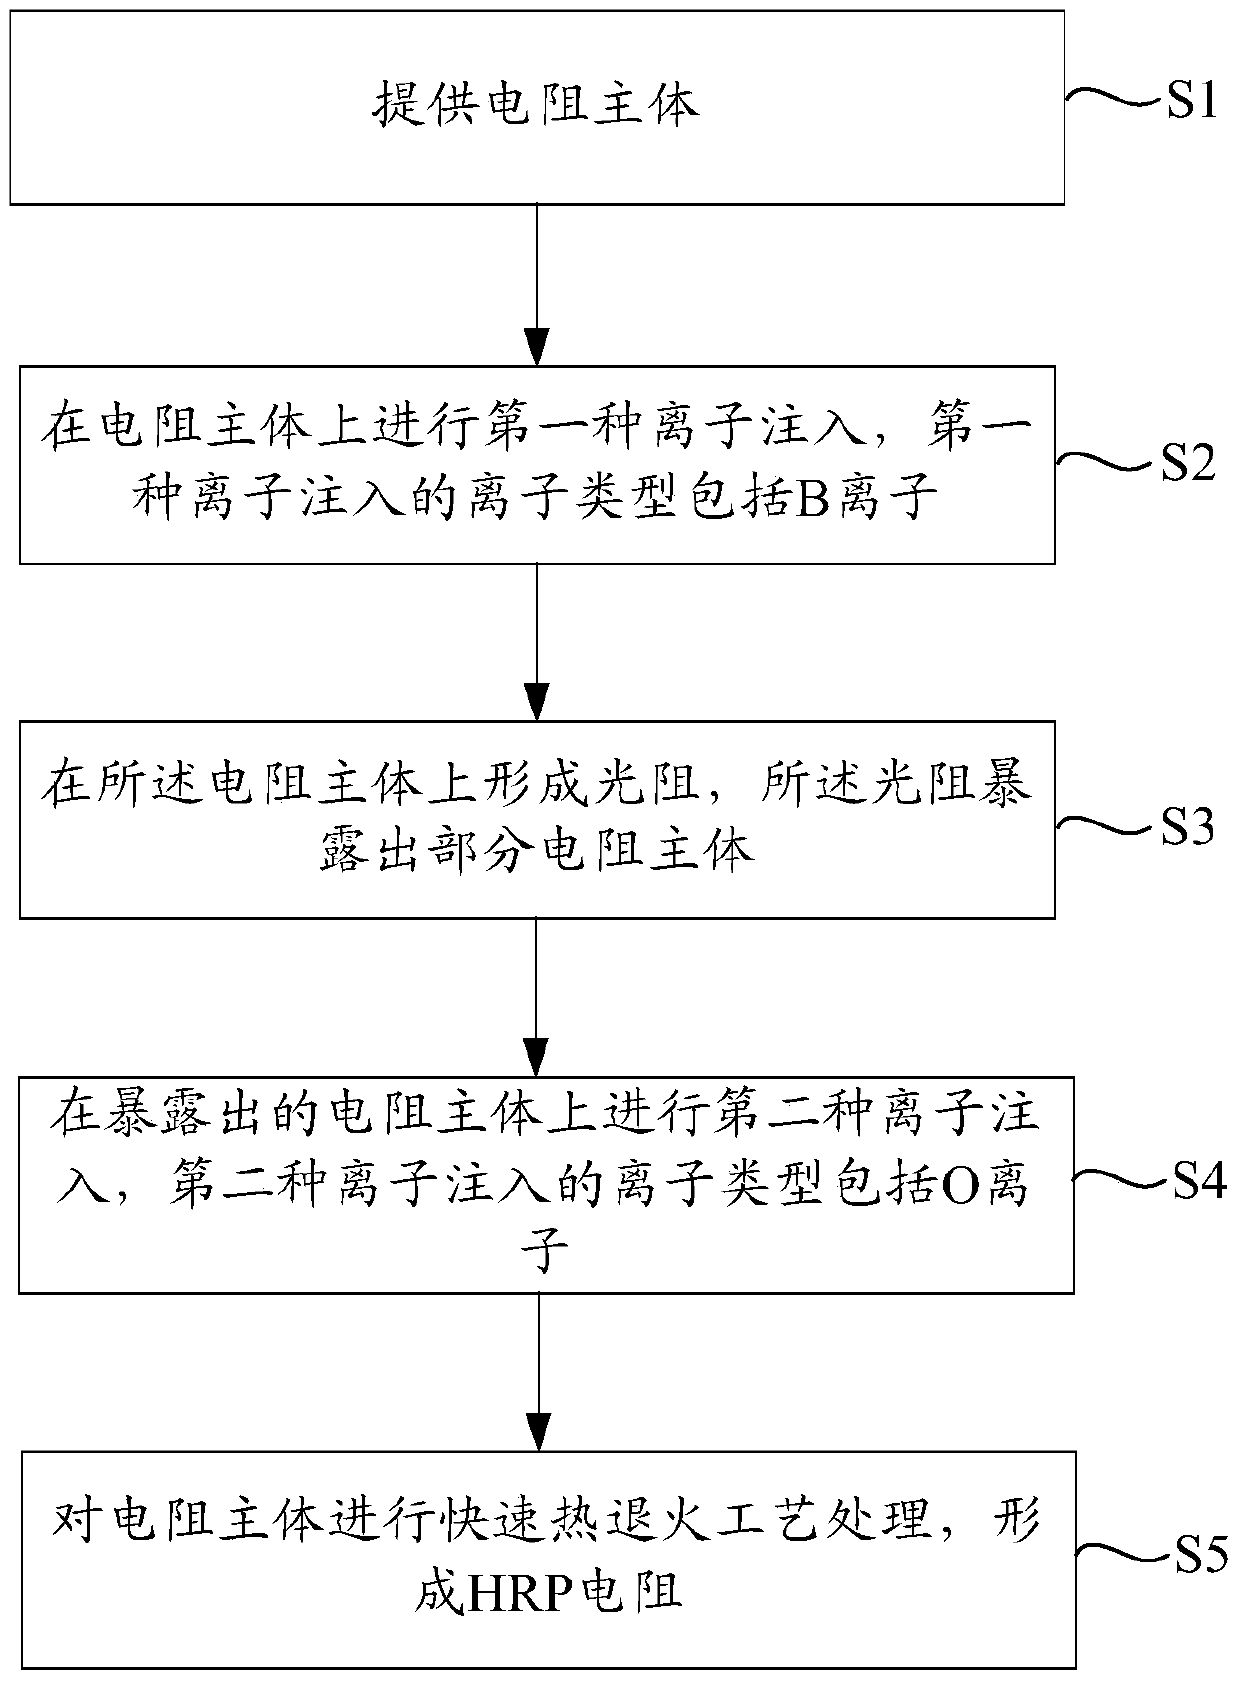 The preparation method of HRP resistance and the method of changing its resistance